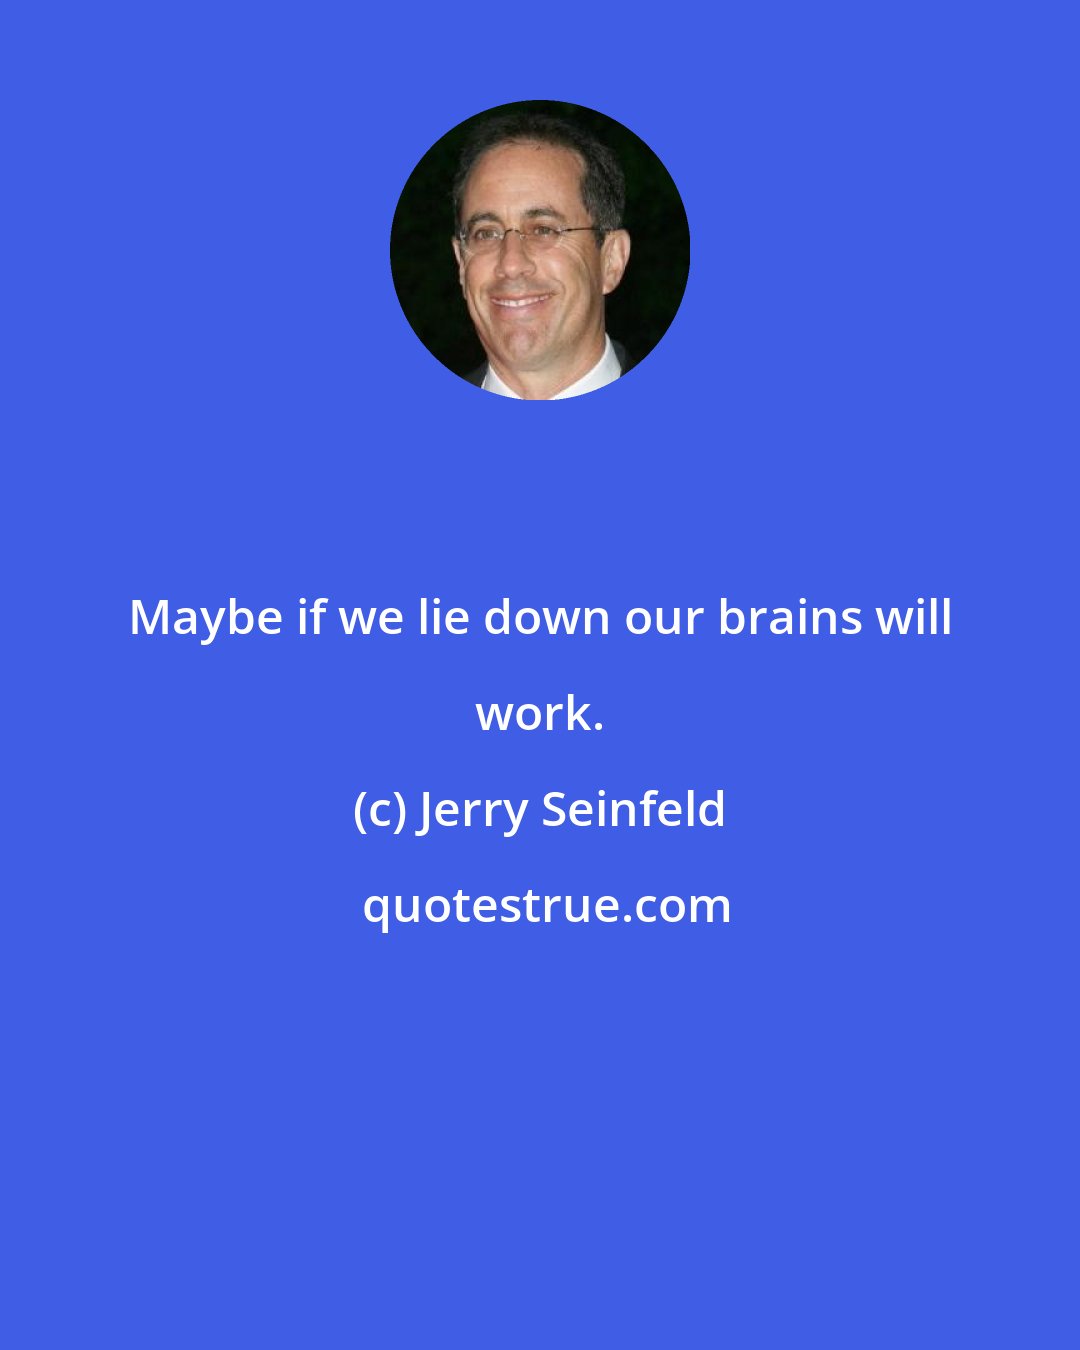 Jerry Seinfeld: Maybe if we lie down our brains will work.